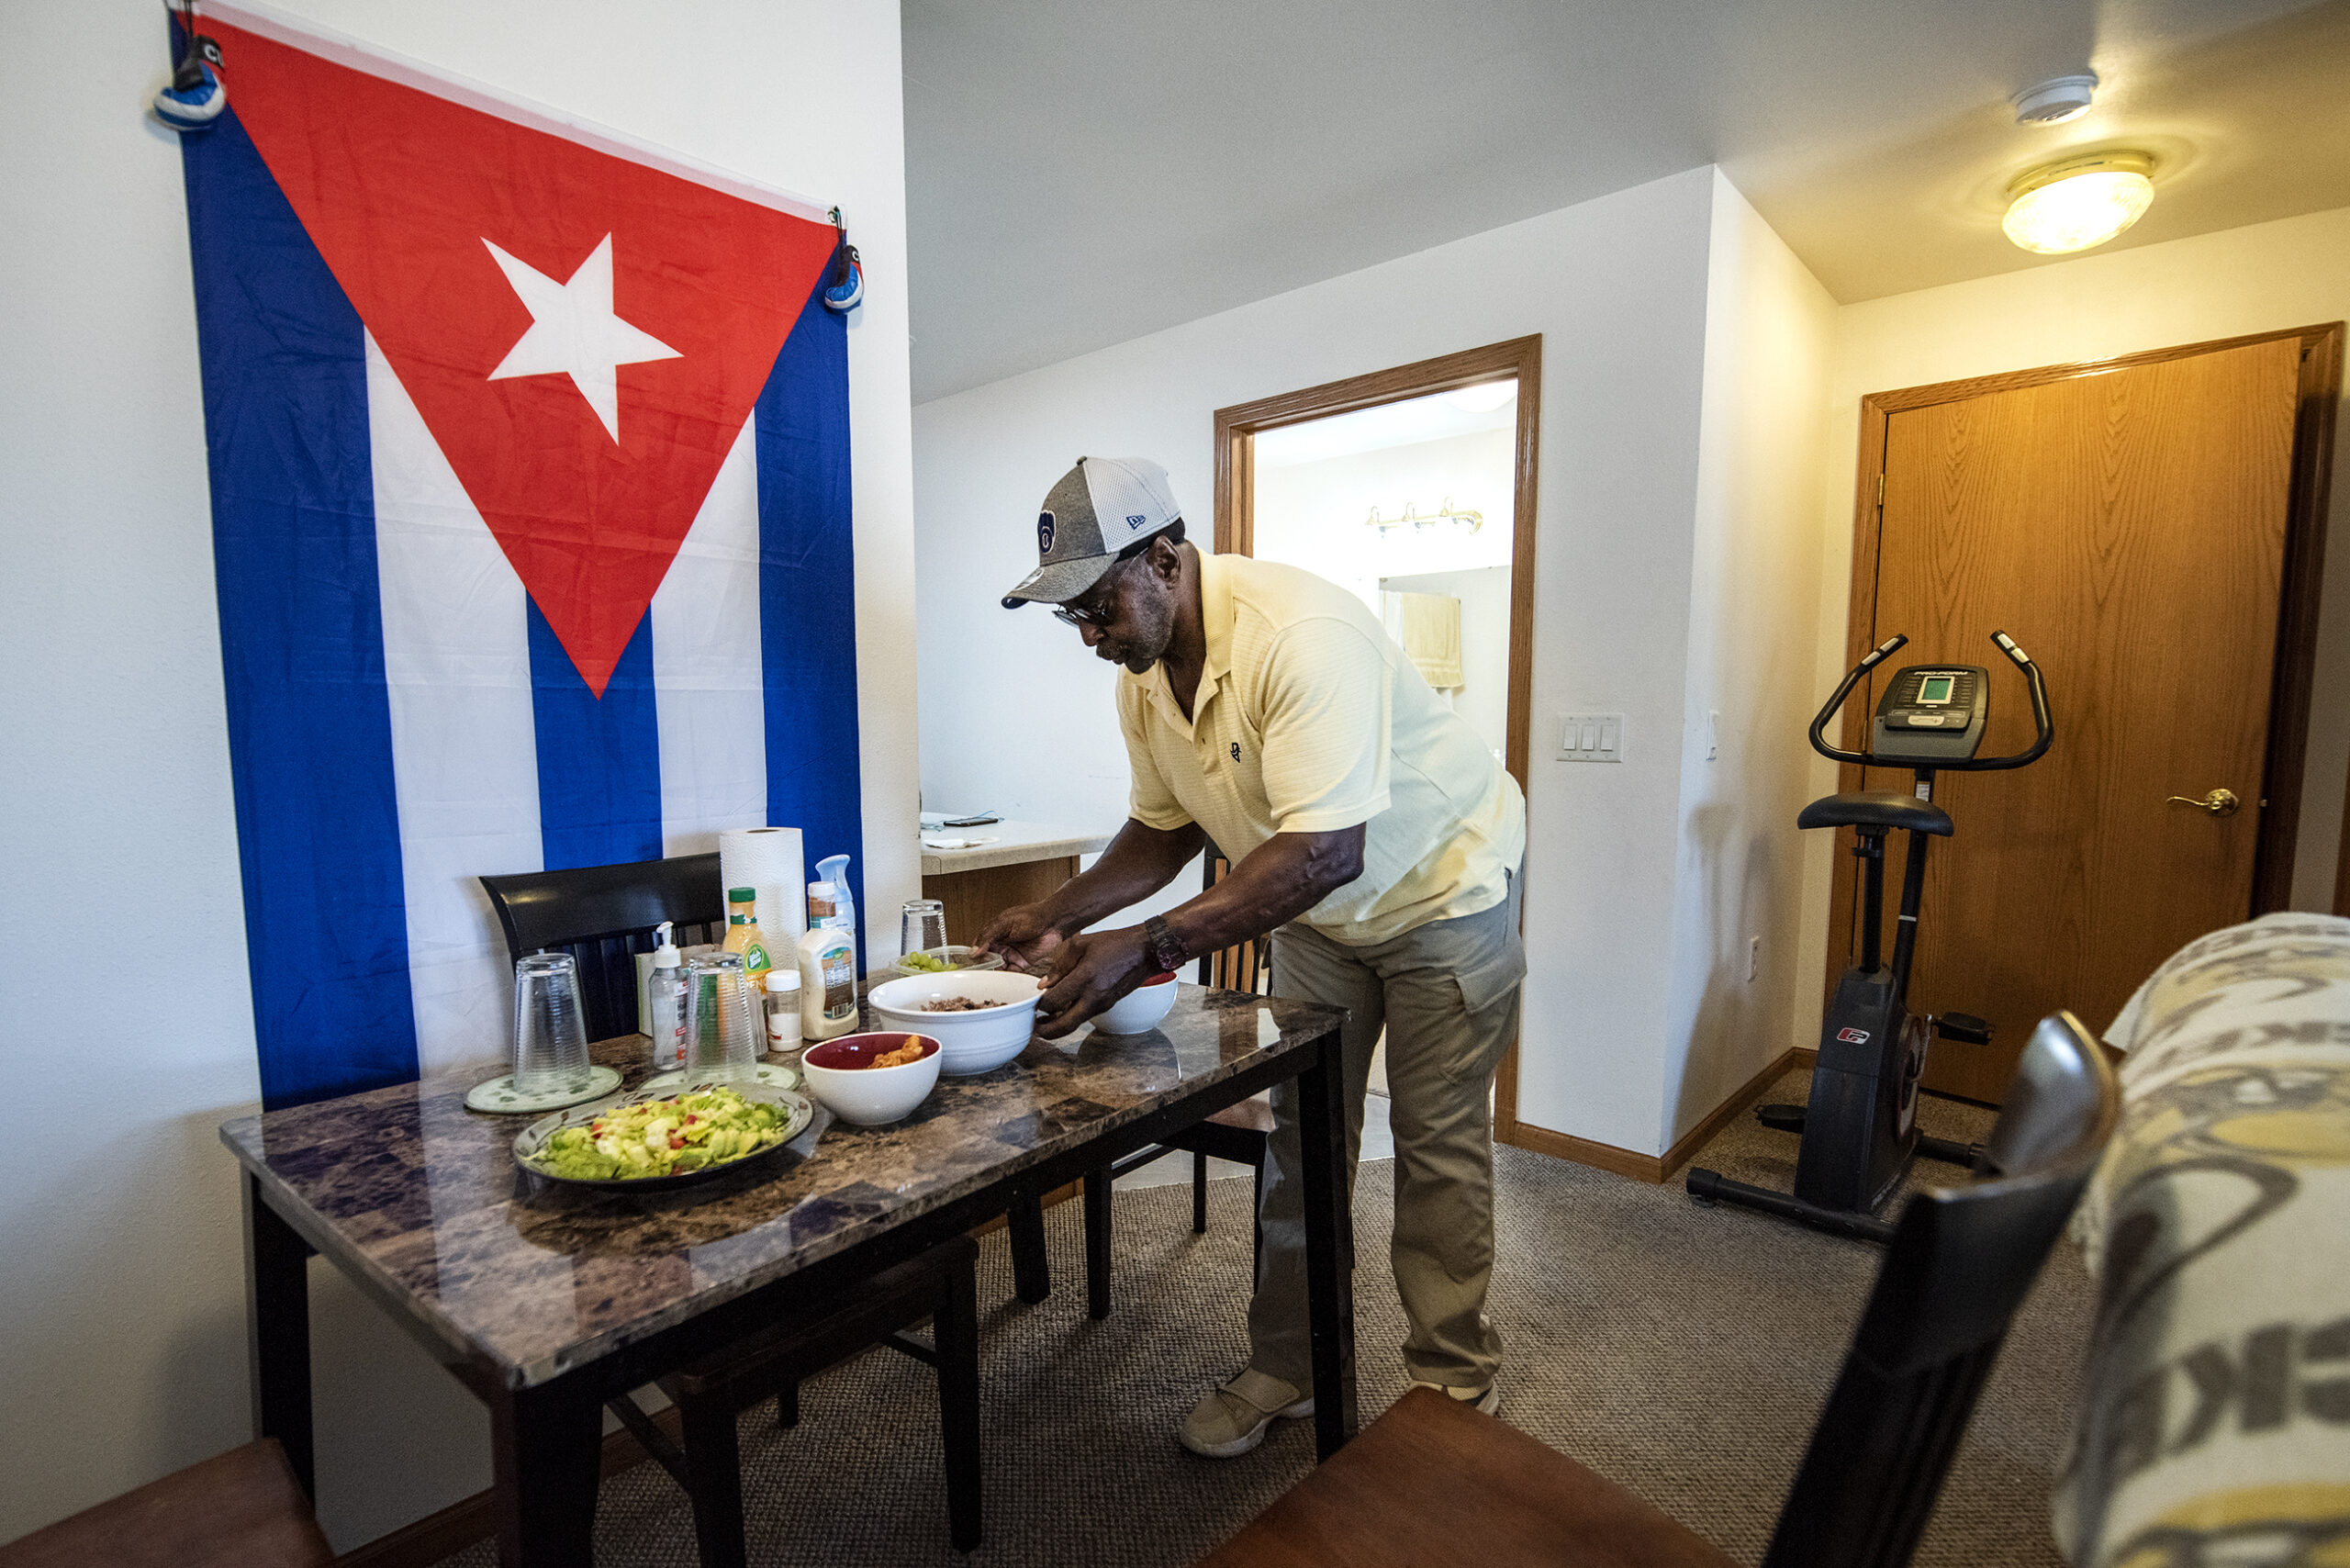 Osvaldo Durruthy prepares a meal on his dining table. A large Cuban flag is hung over the table